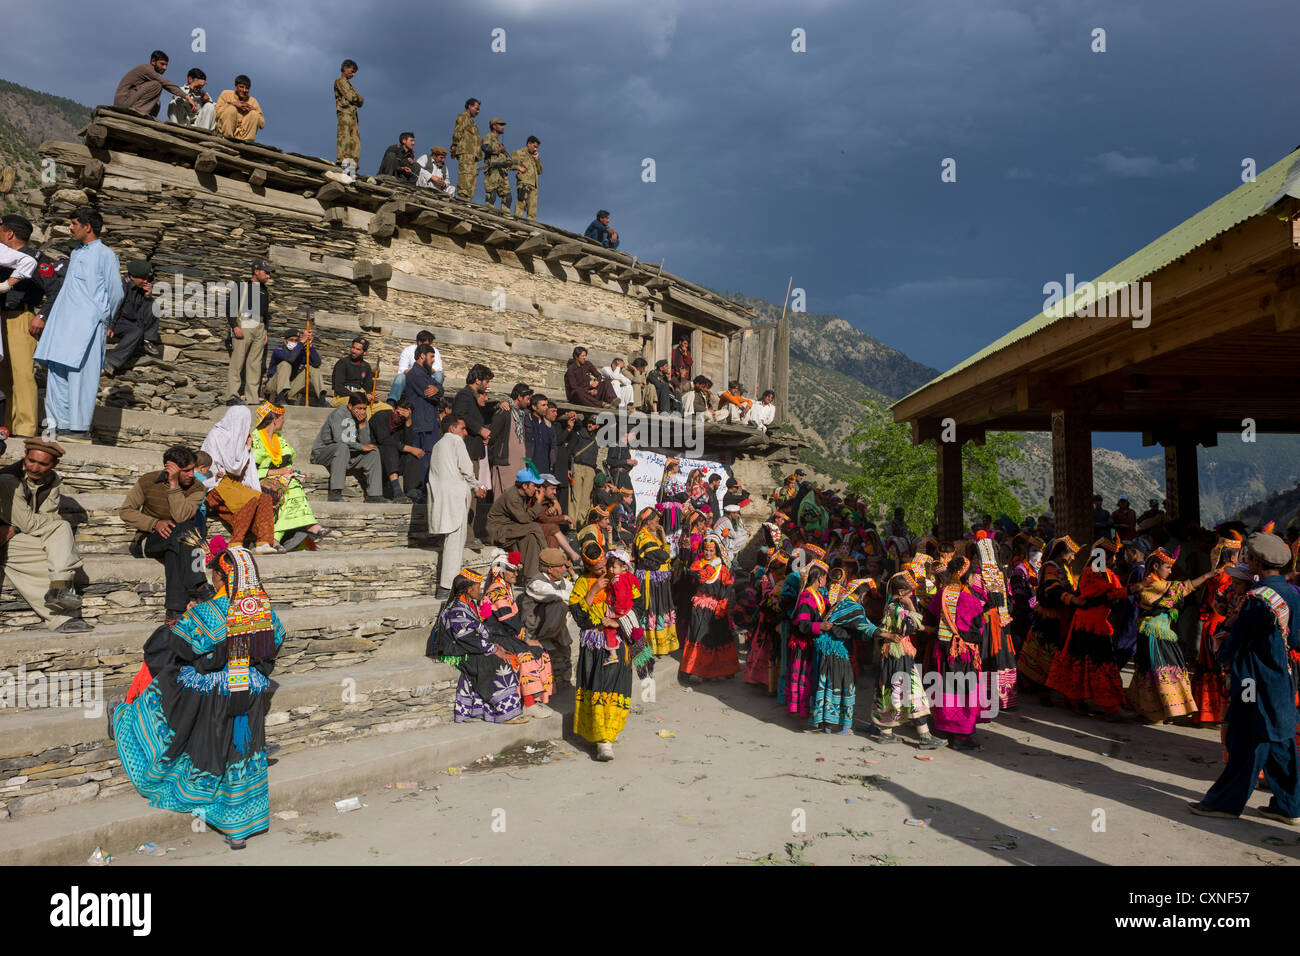 Kalash women and girls overlooked by security forces at the Grum Village Charso (dancing ground), Kalash Joshi (Spring Festival), Rumbur Valley, Chitral, Khyber-Pakhtunkhwa, Pakistan Stock Photo